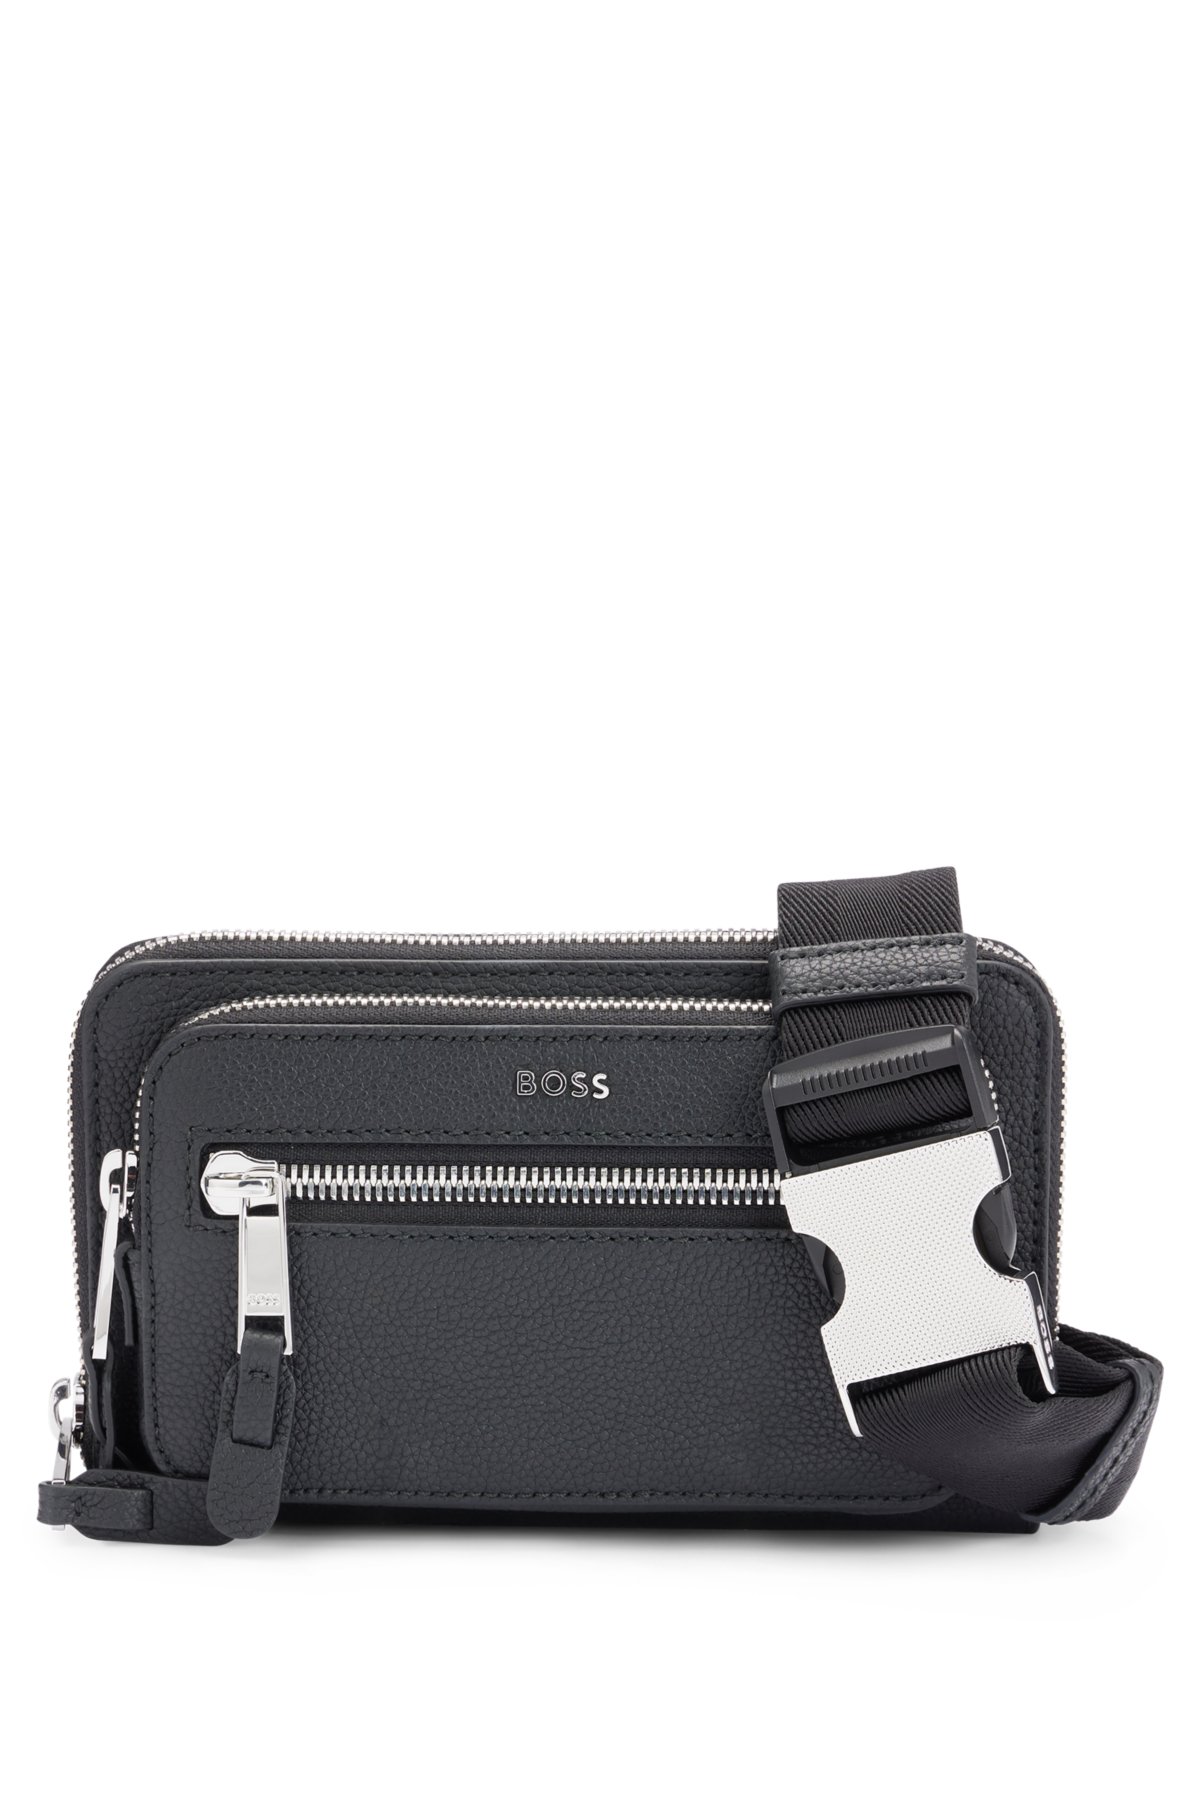 BOSS - Crossbody bag in logo lettering grained leather with